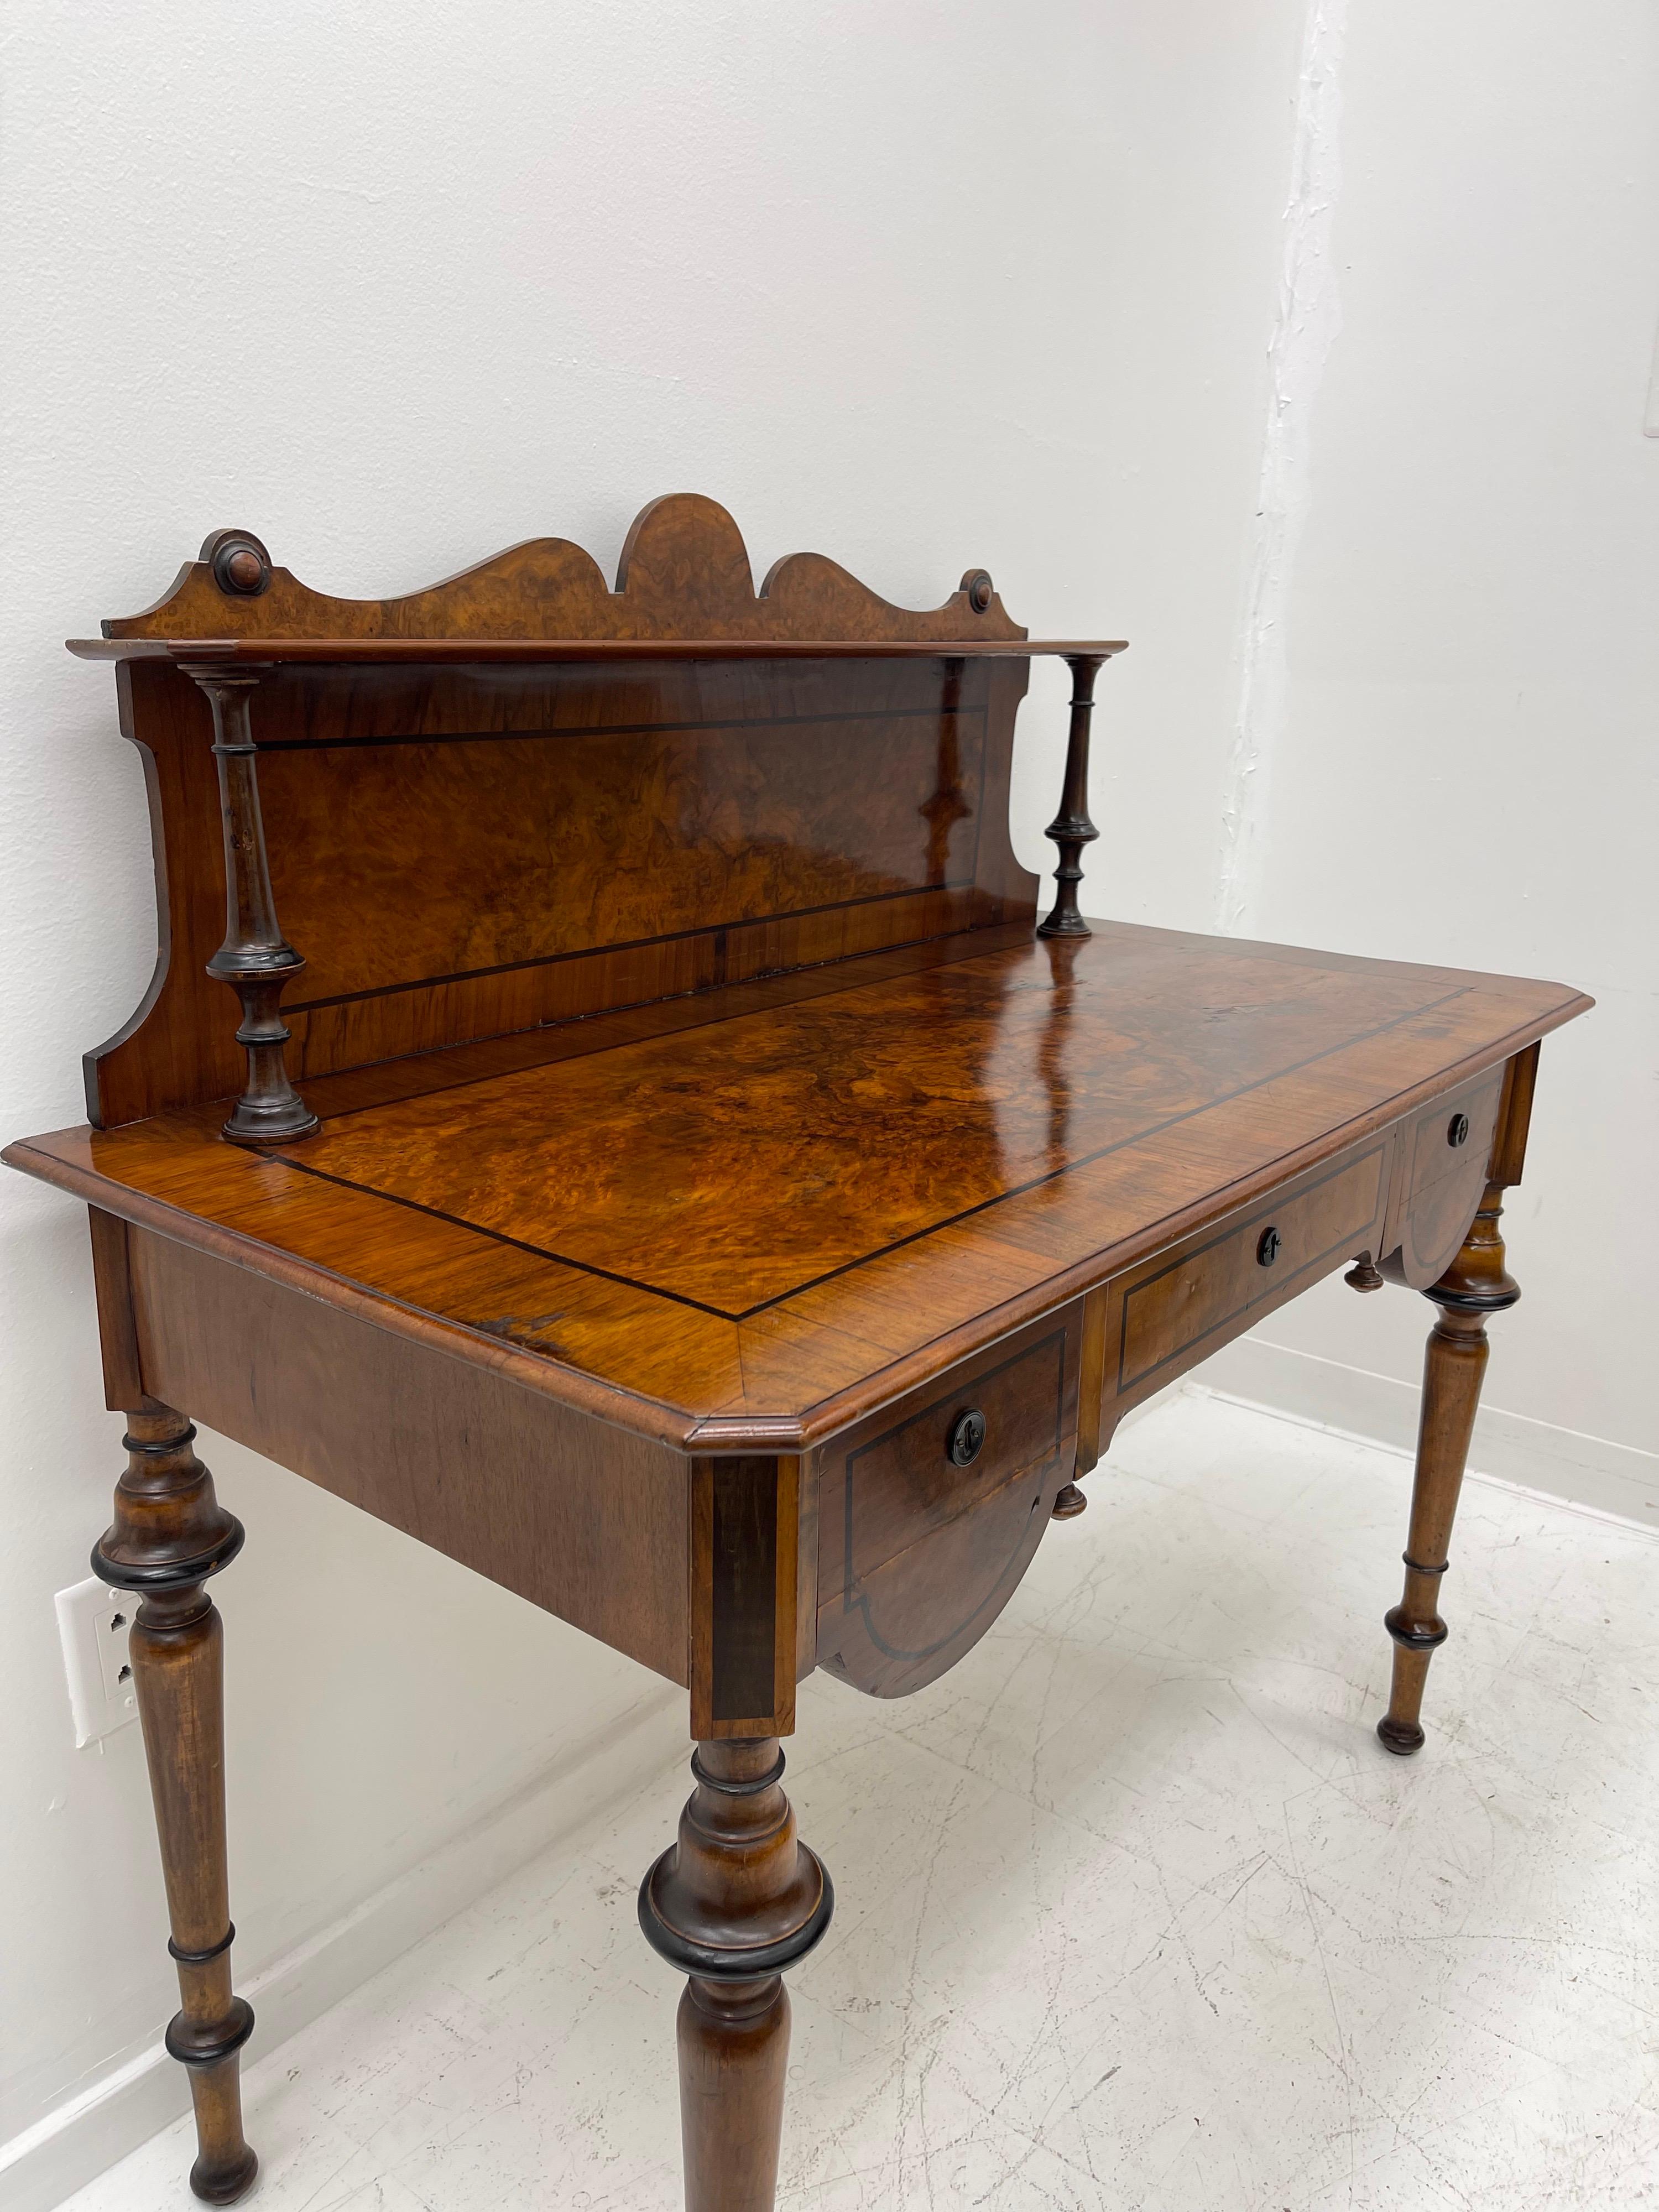 For sale is a good quality Victorian Mahogany, Satinwood Banded and Marquetry Inlaid Writing Desk. The writing surface is veneered with flame mahogany Burl panels, includes three drawers, on hand tapered legs. Overall the desk is in good original